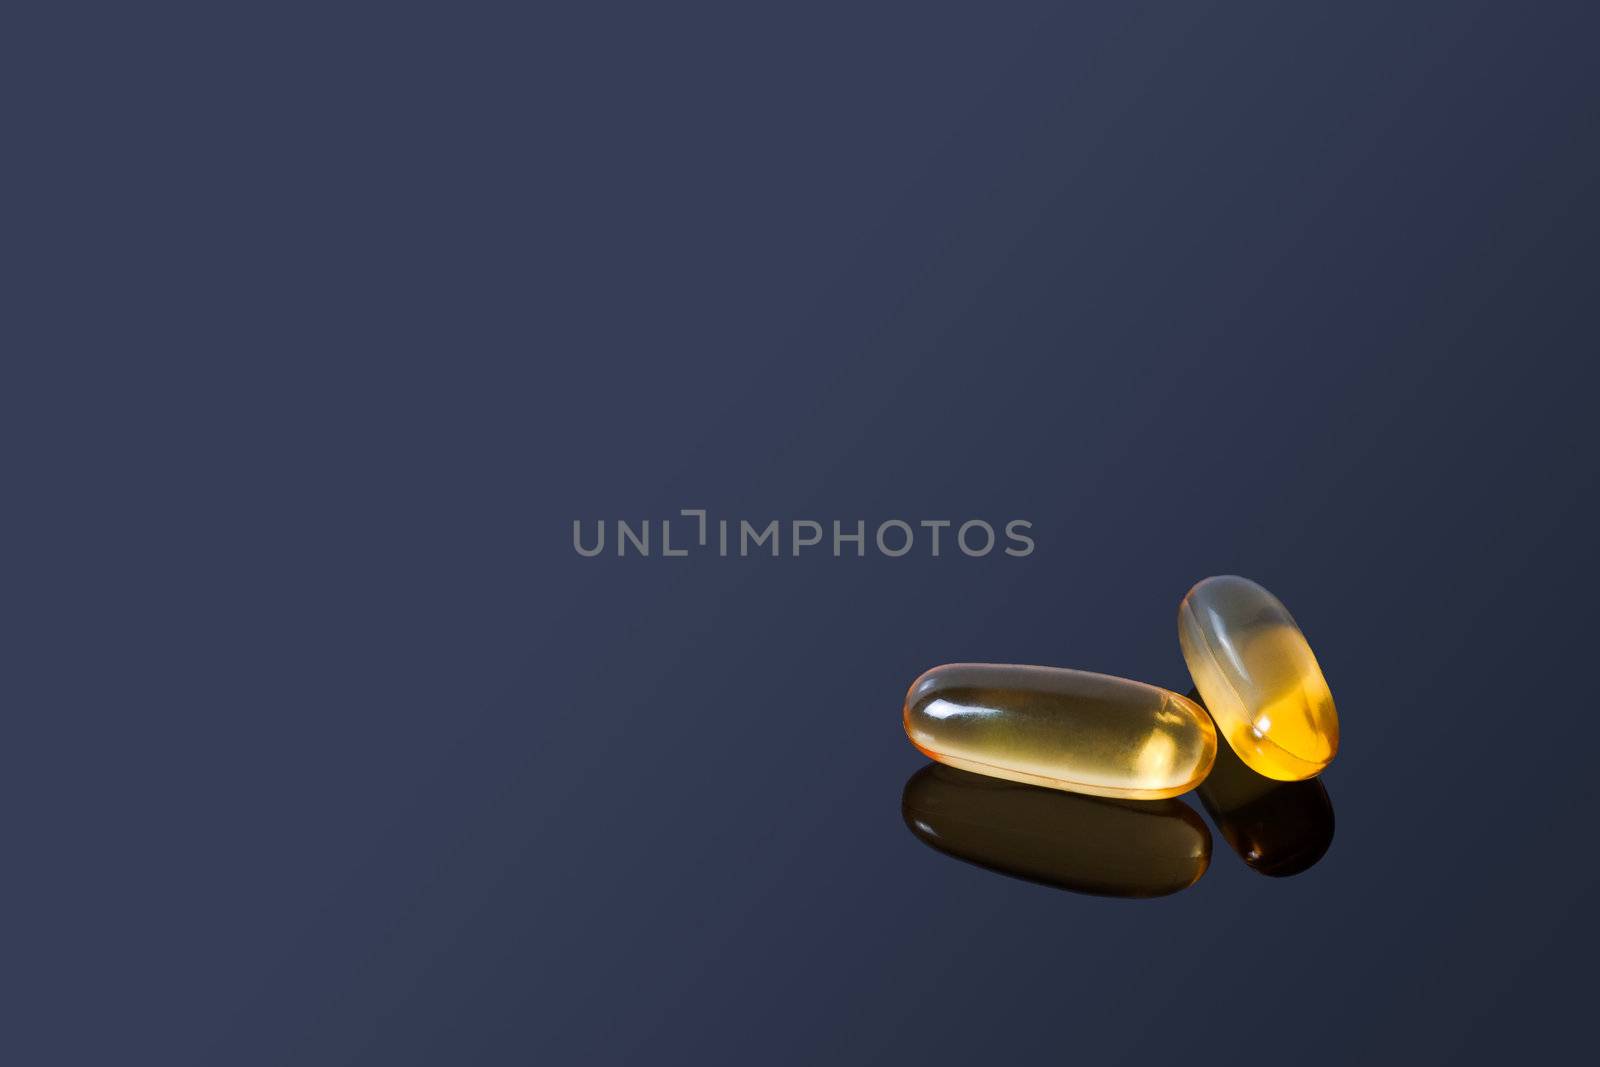 A couple of yellow vitamin pills on a black glass table